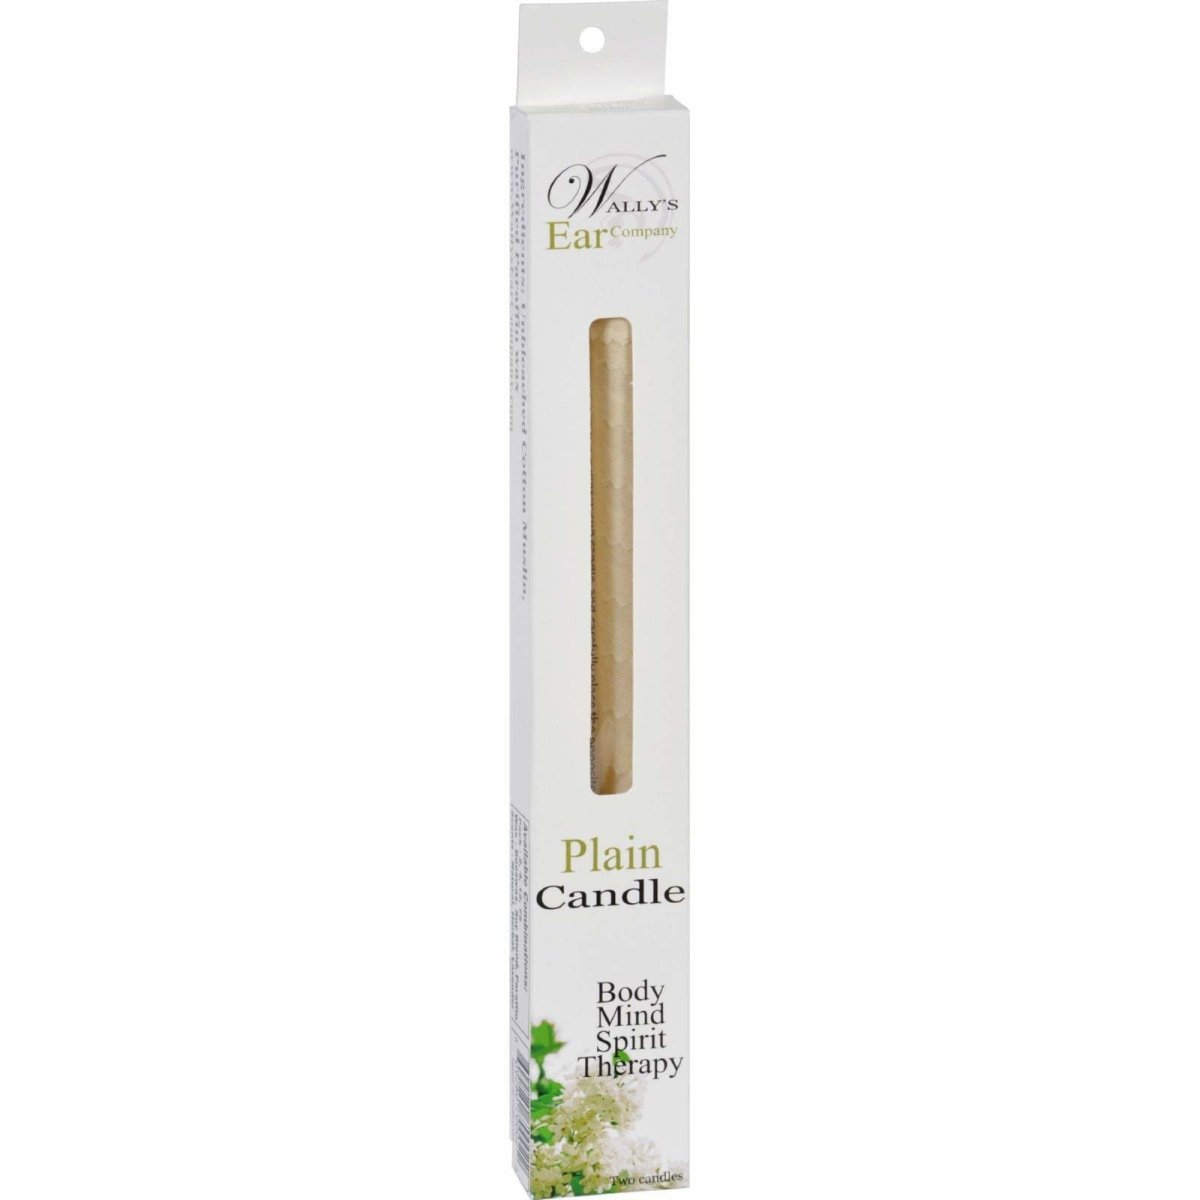 Wallys Natural Products 1029693 Candle Plain - 2 Candles